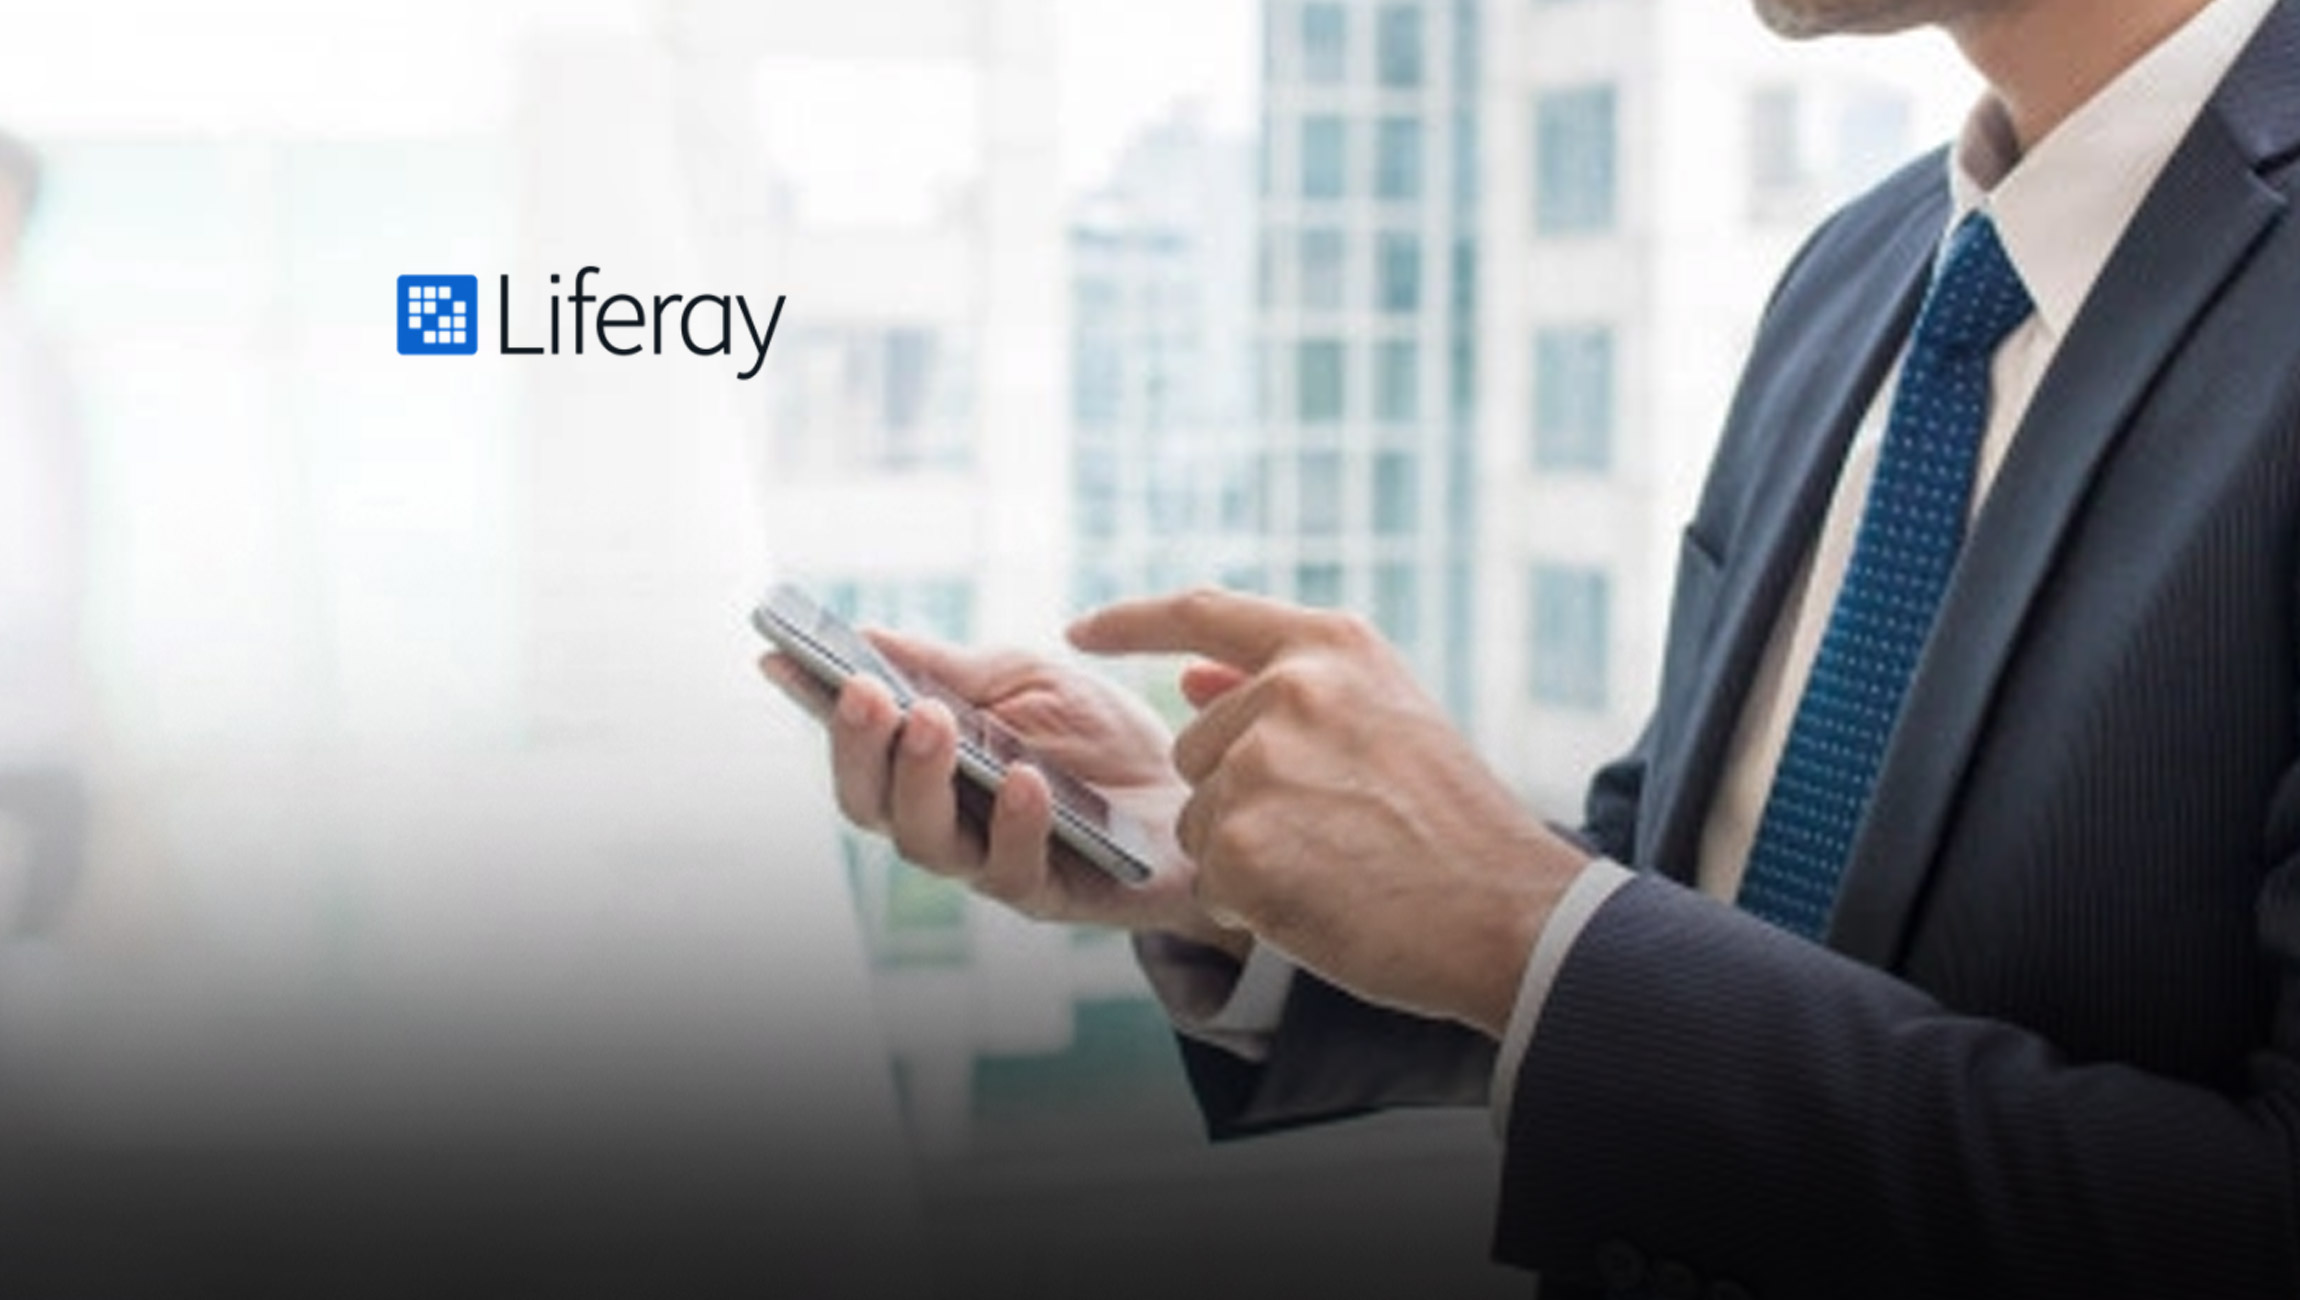 Liferay Receives Highest Product Scores for Two of Three Use Cases in the 2021 Gartner Critical Capabilities for Digital Experience Platforms